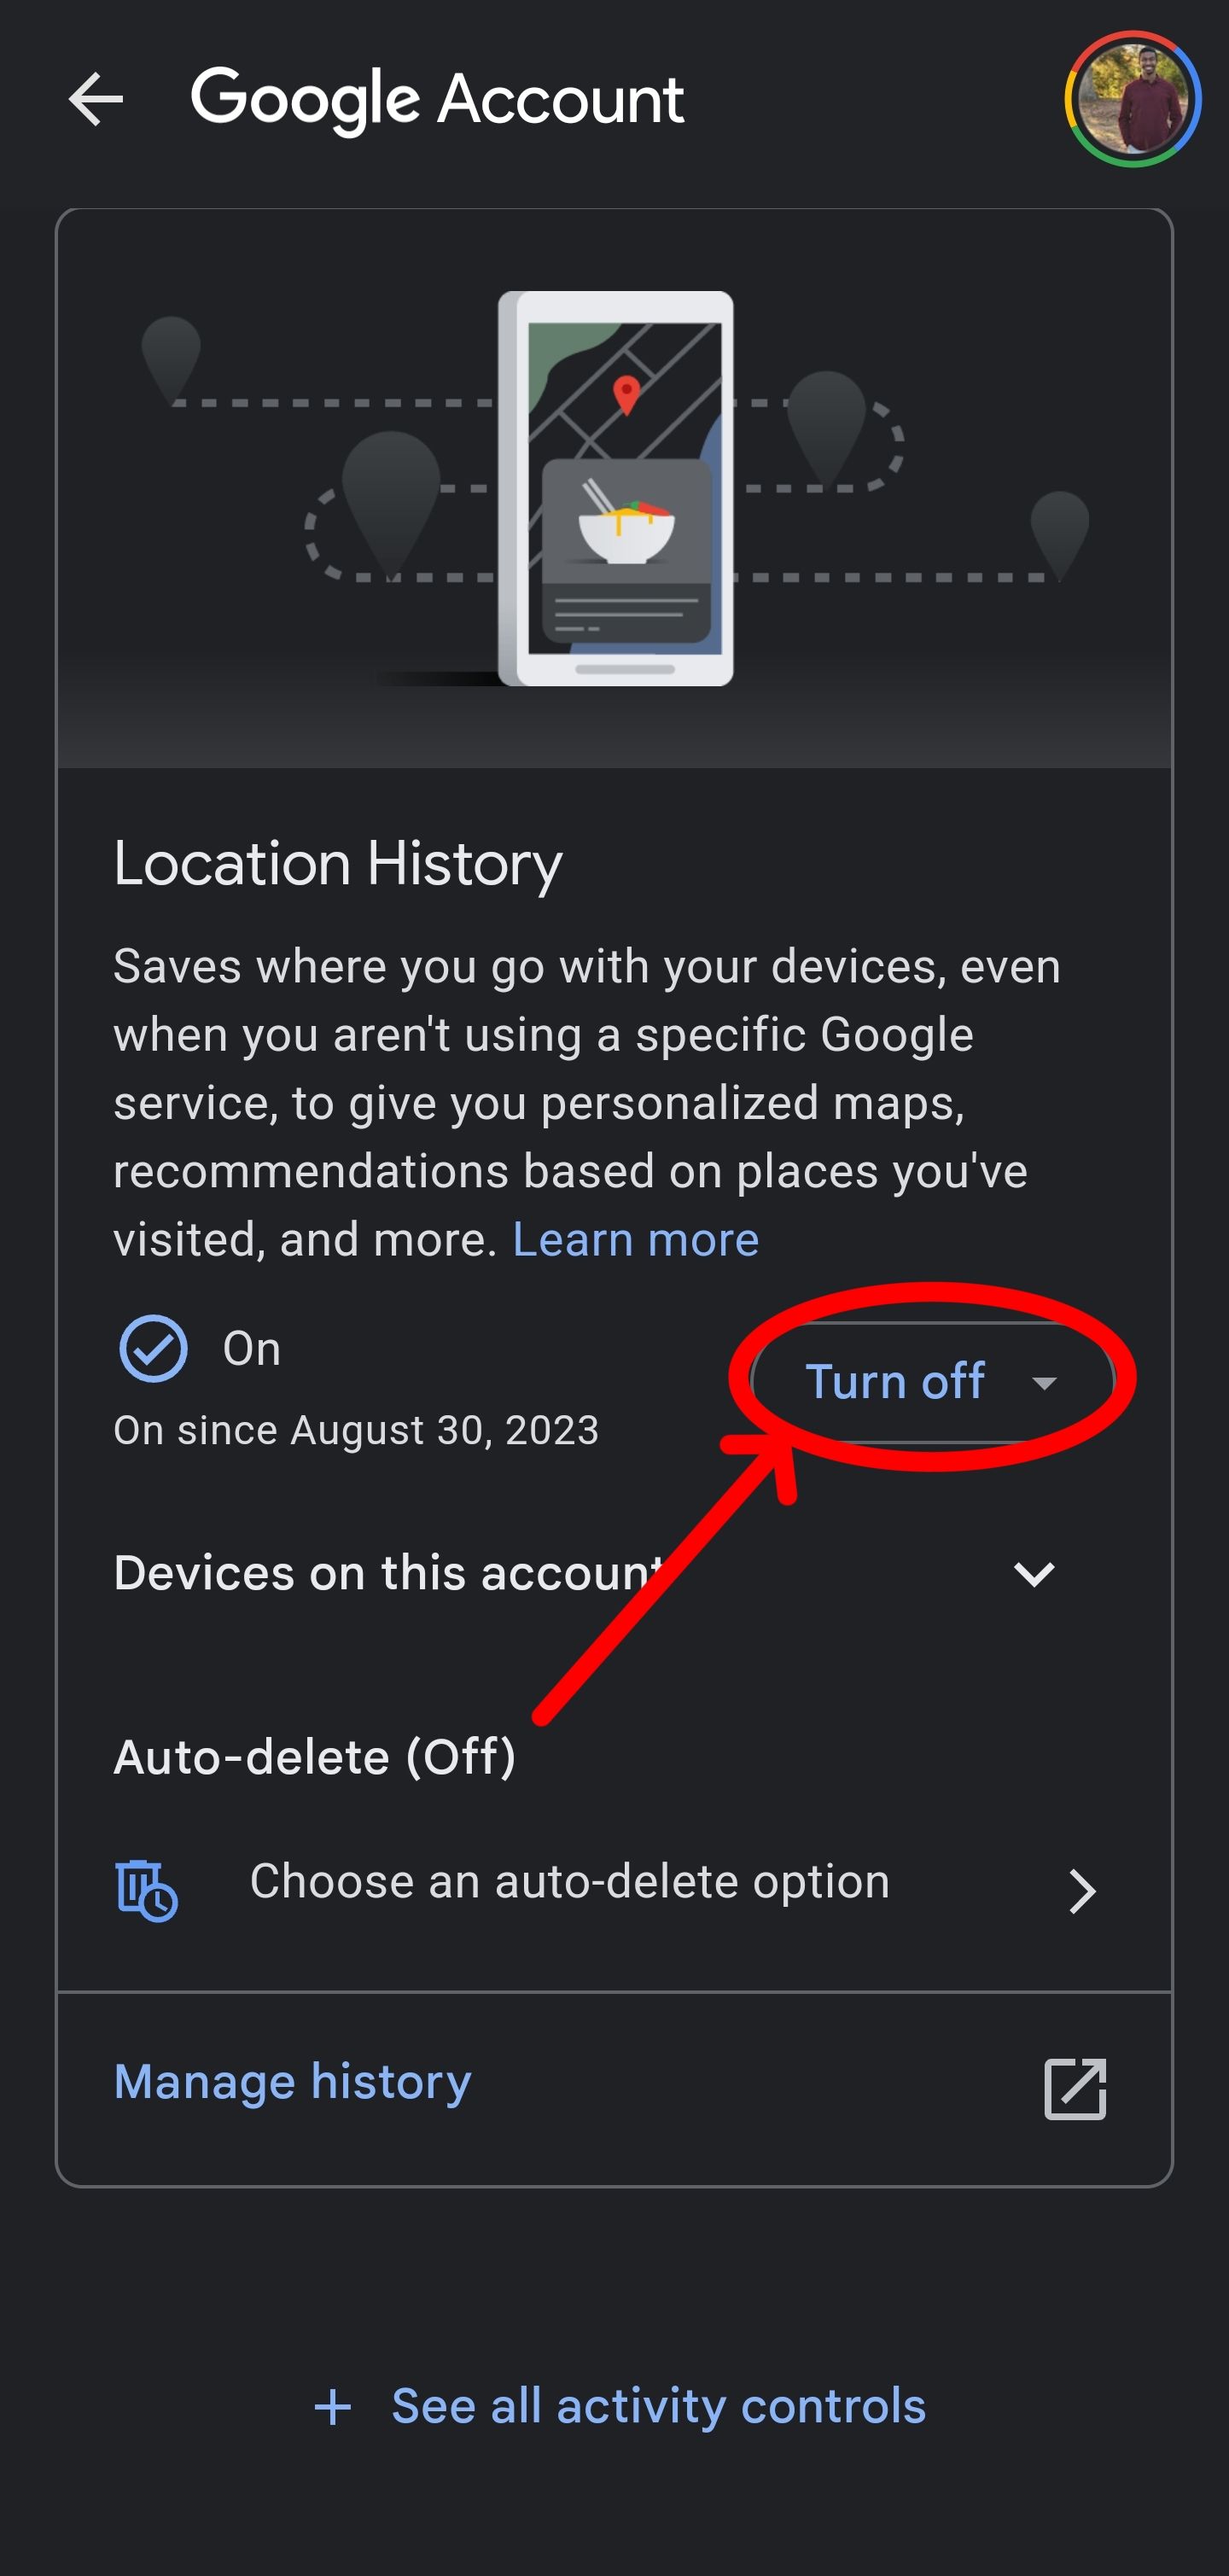 Under location history, look for the drop down menu to turn off the tracking option.